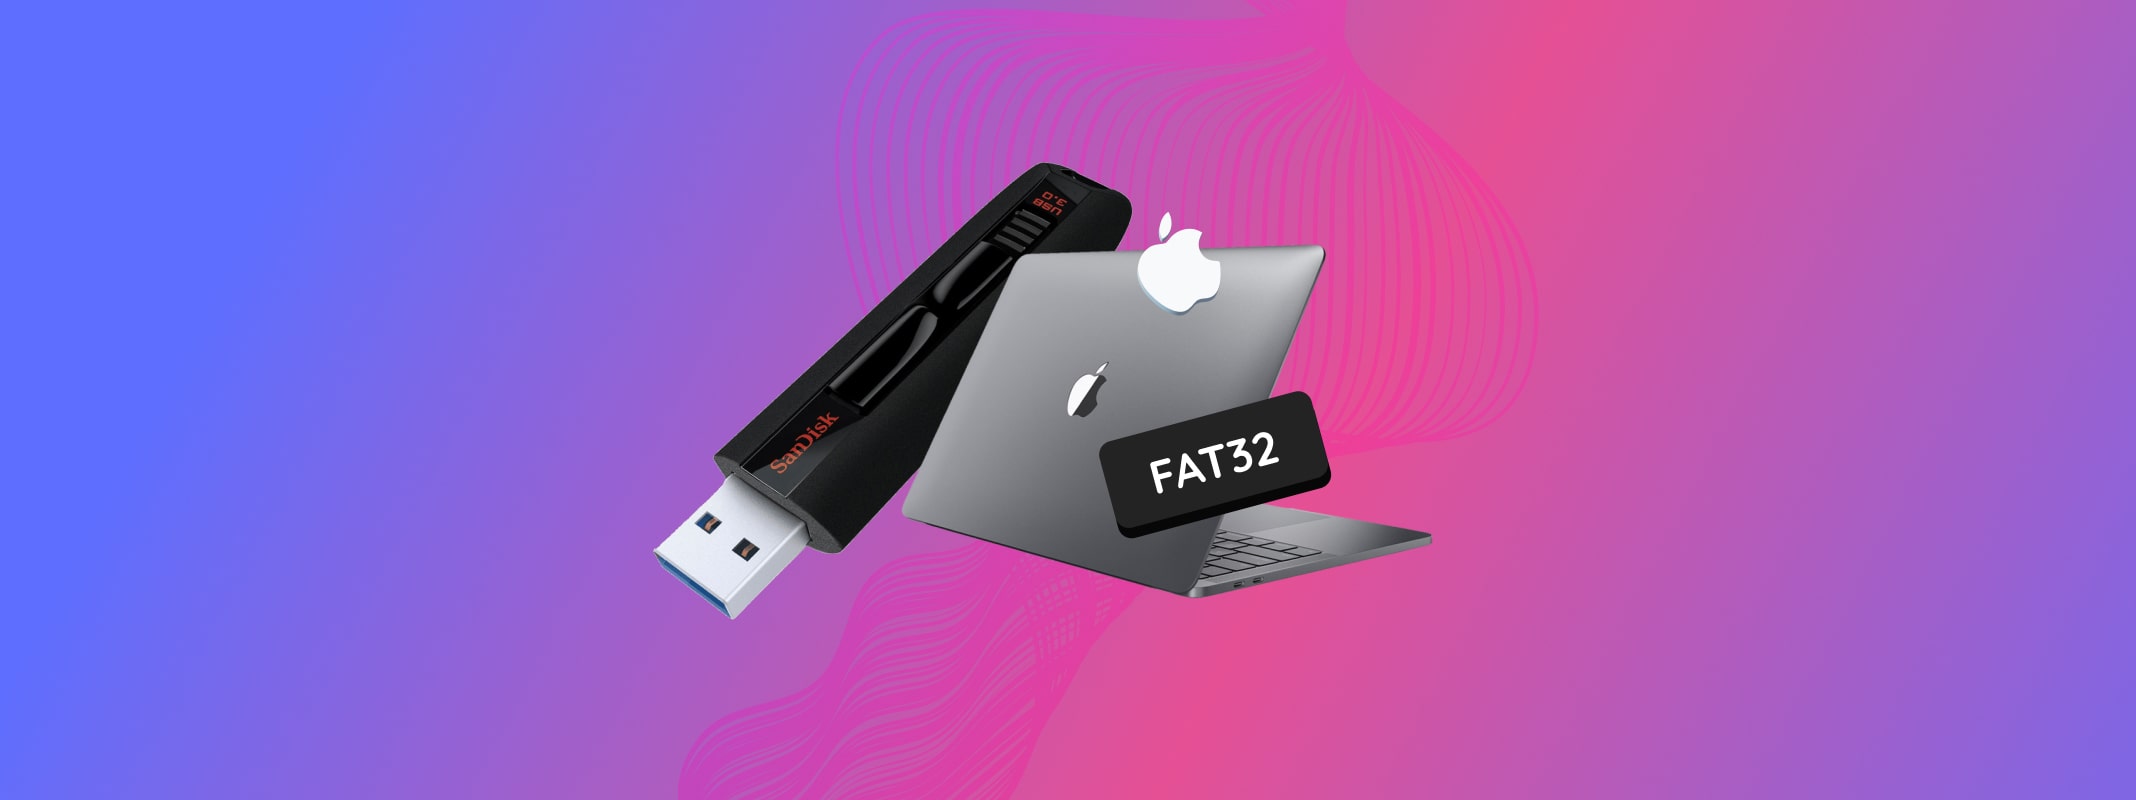 how to format a usb to fat32 on mac